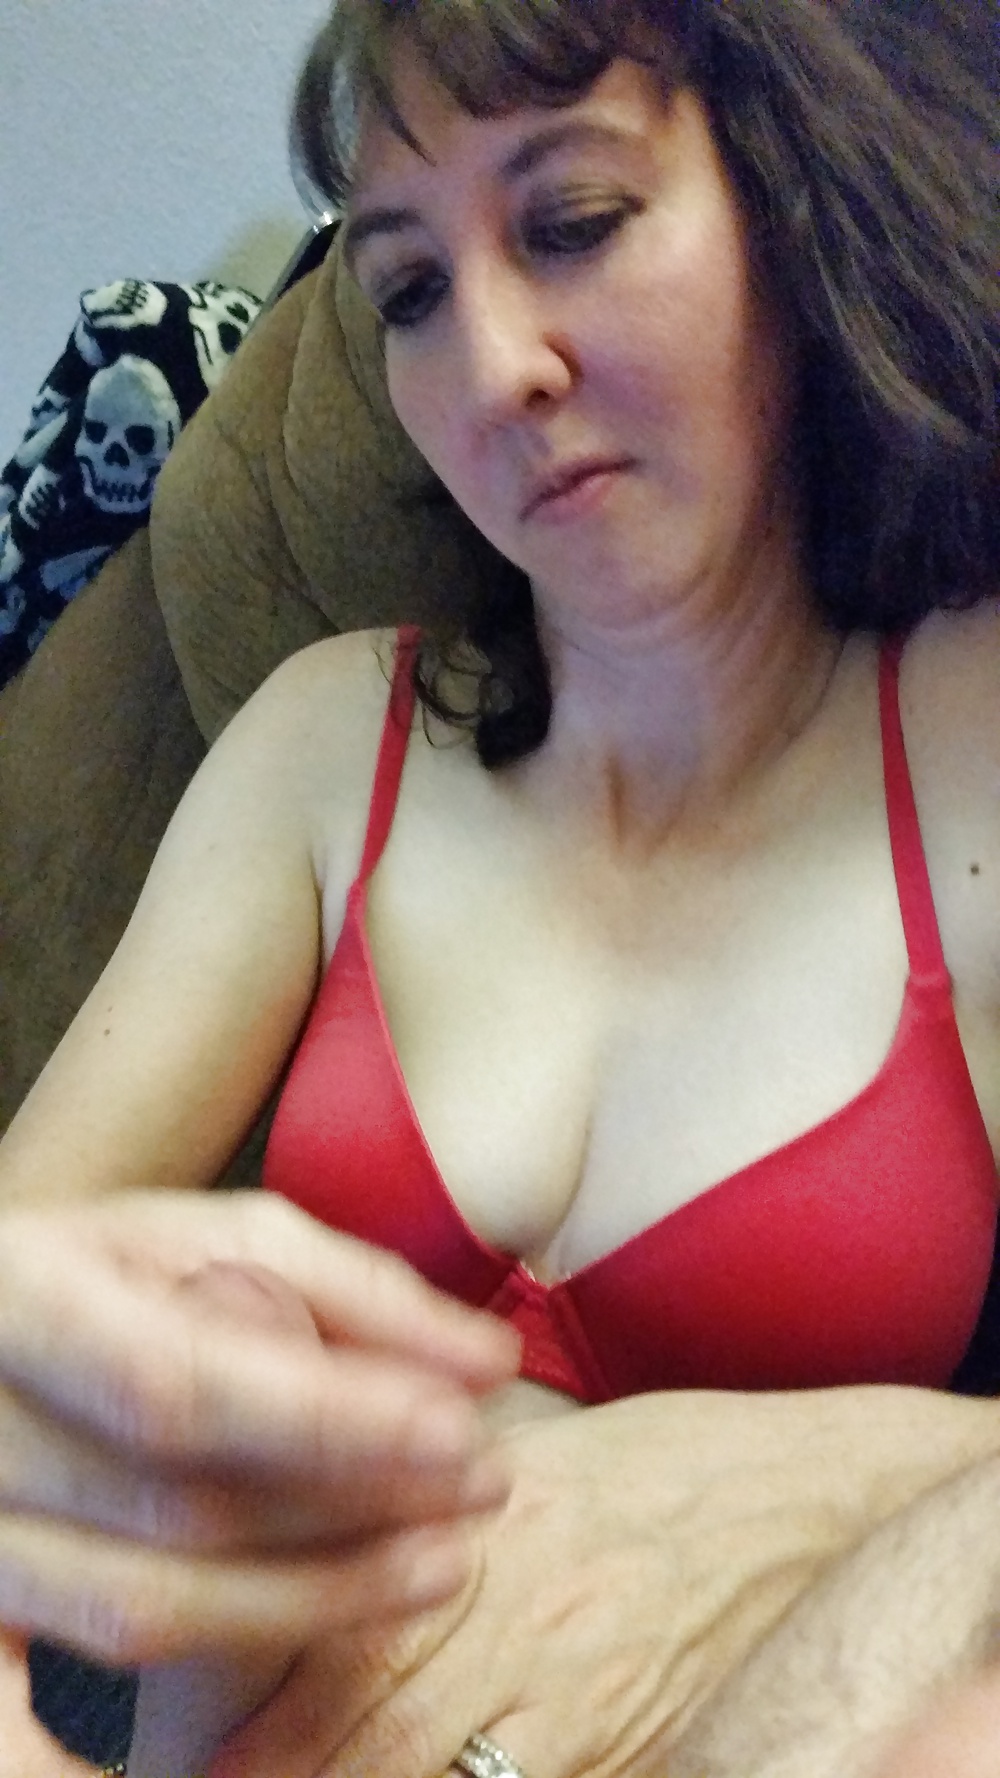 A hand job and blow job from my wife. #32168096